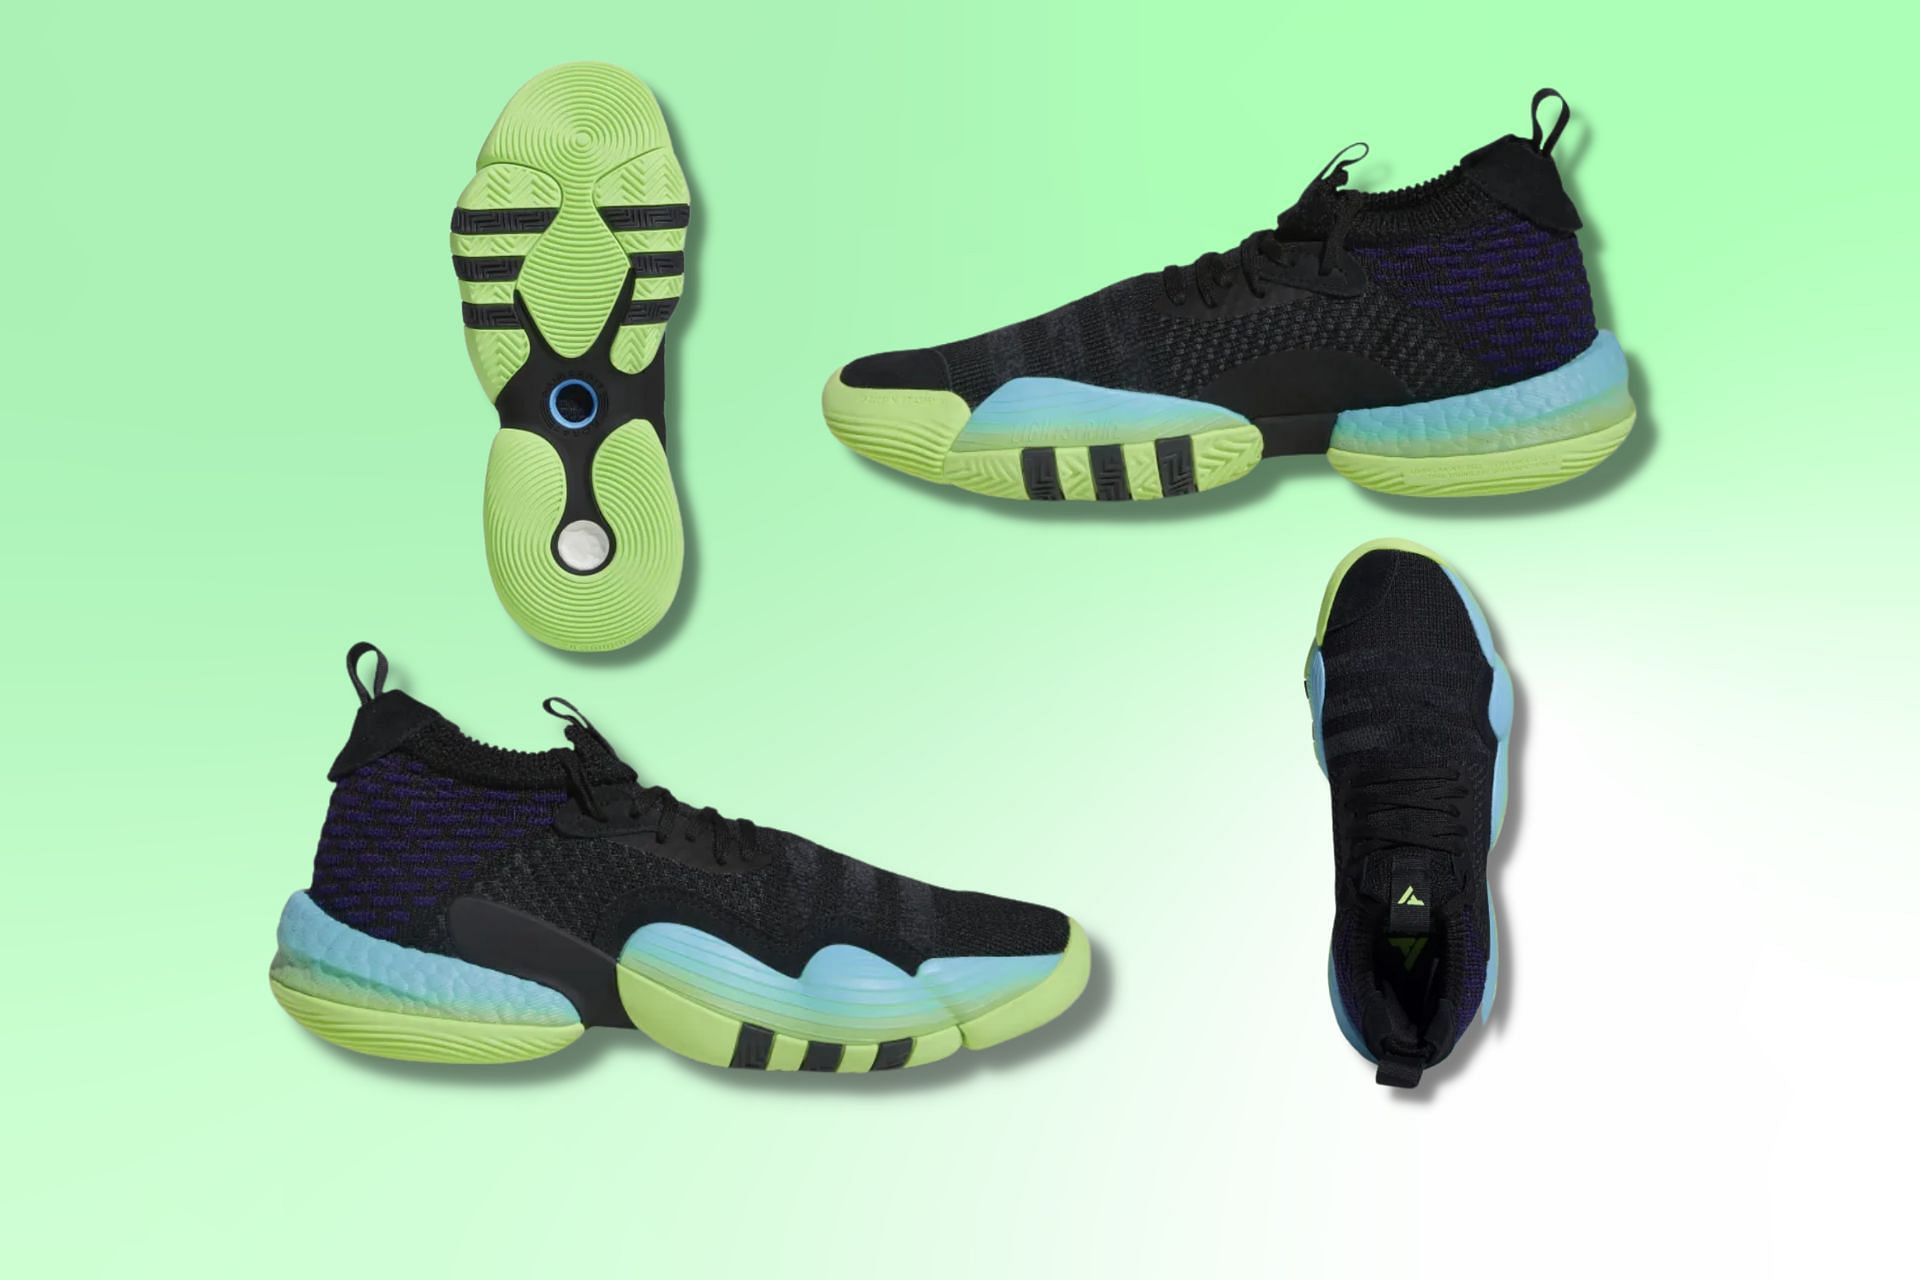 Upcoming Trae Young 2.0 &#039;Core Black / Team Solar Green&#039; sneakers under Adidas x Trae Young collaboration (Image via Sportskeeda)